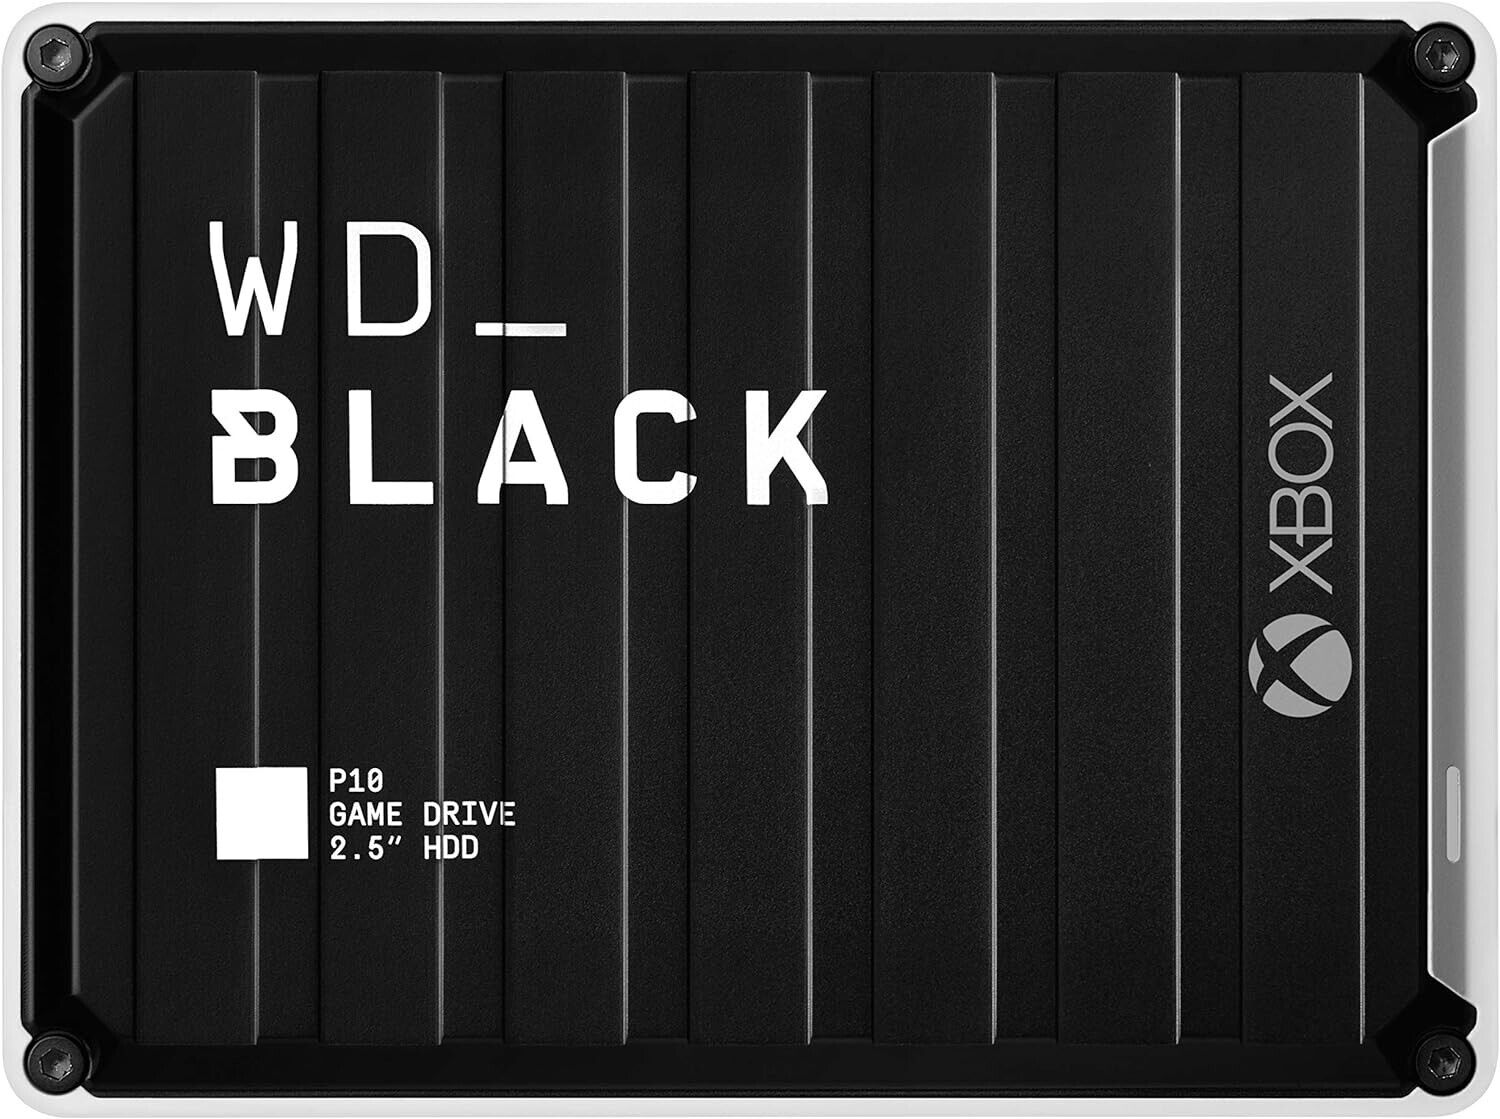 WD_BLACK 5TB P10 Game Drive for Xbox, Certified Refurbished Portable - [LN]™